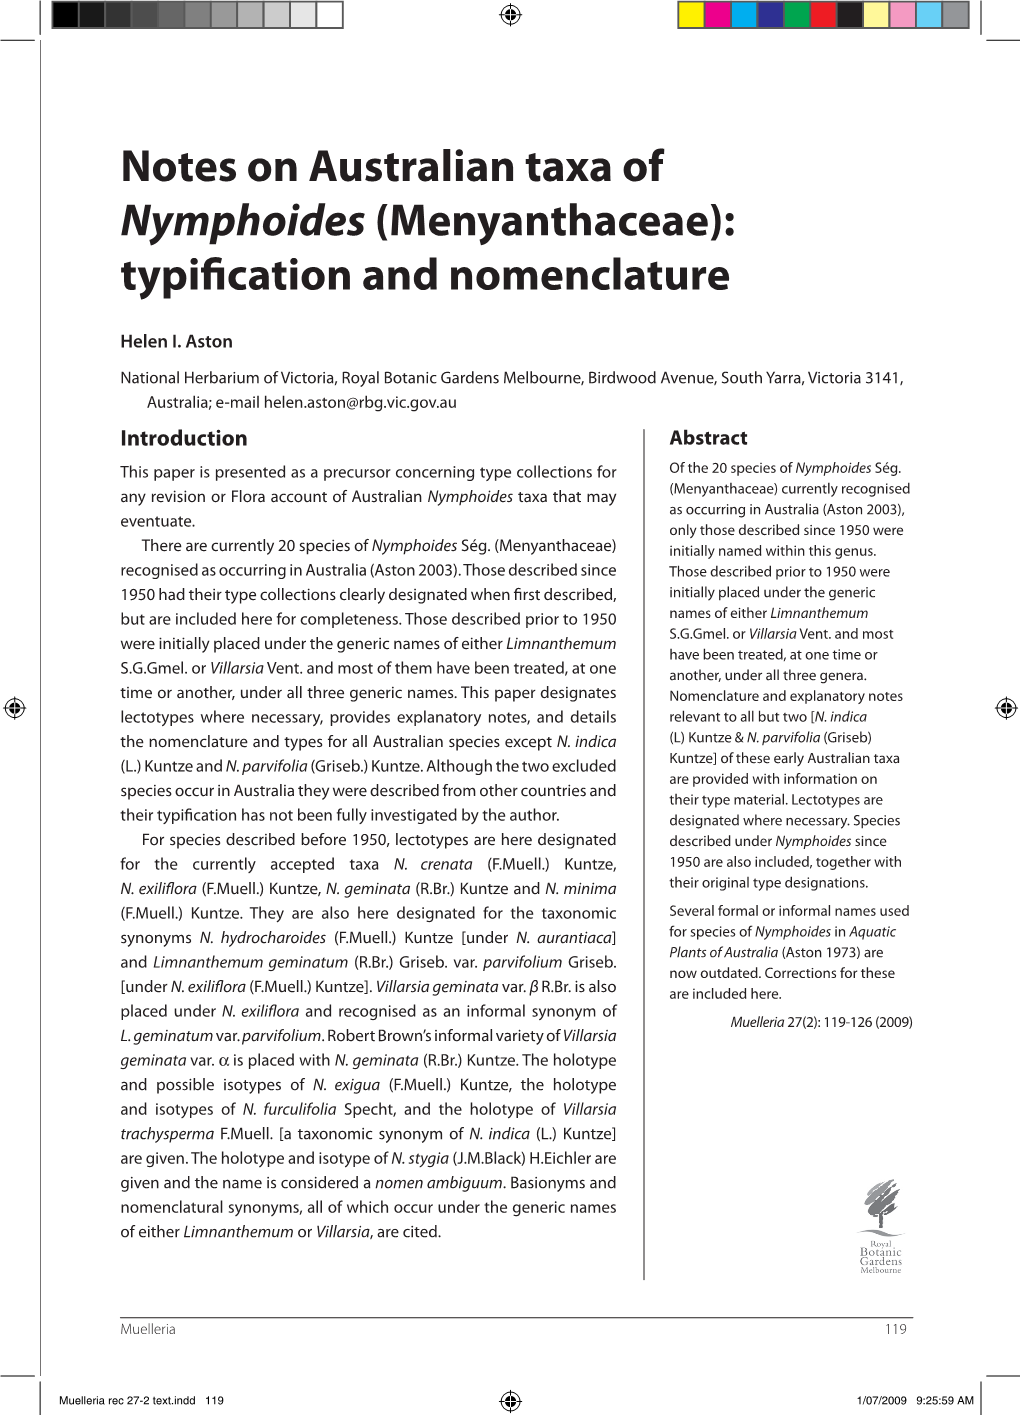 Notes on Australian Taxa of Nymphoides (Menyanthaceae): Typification and Nomenclature